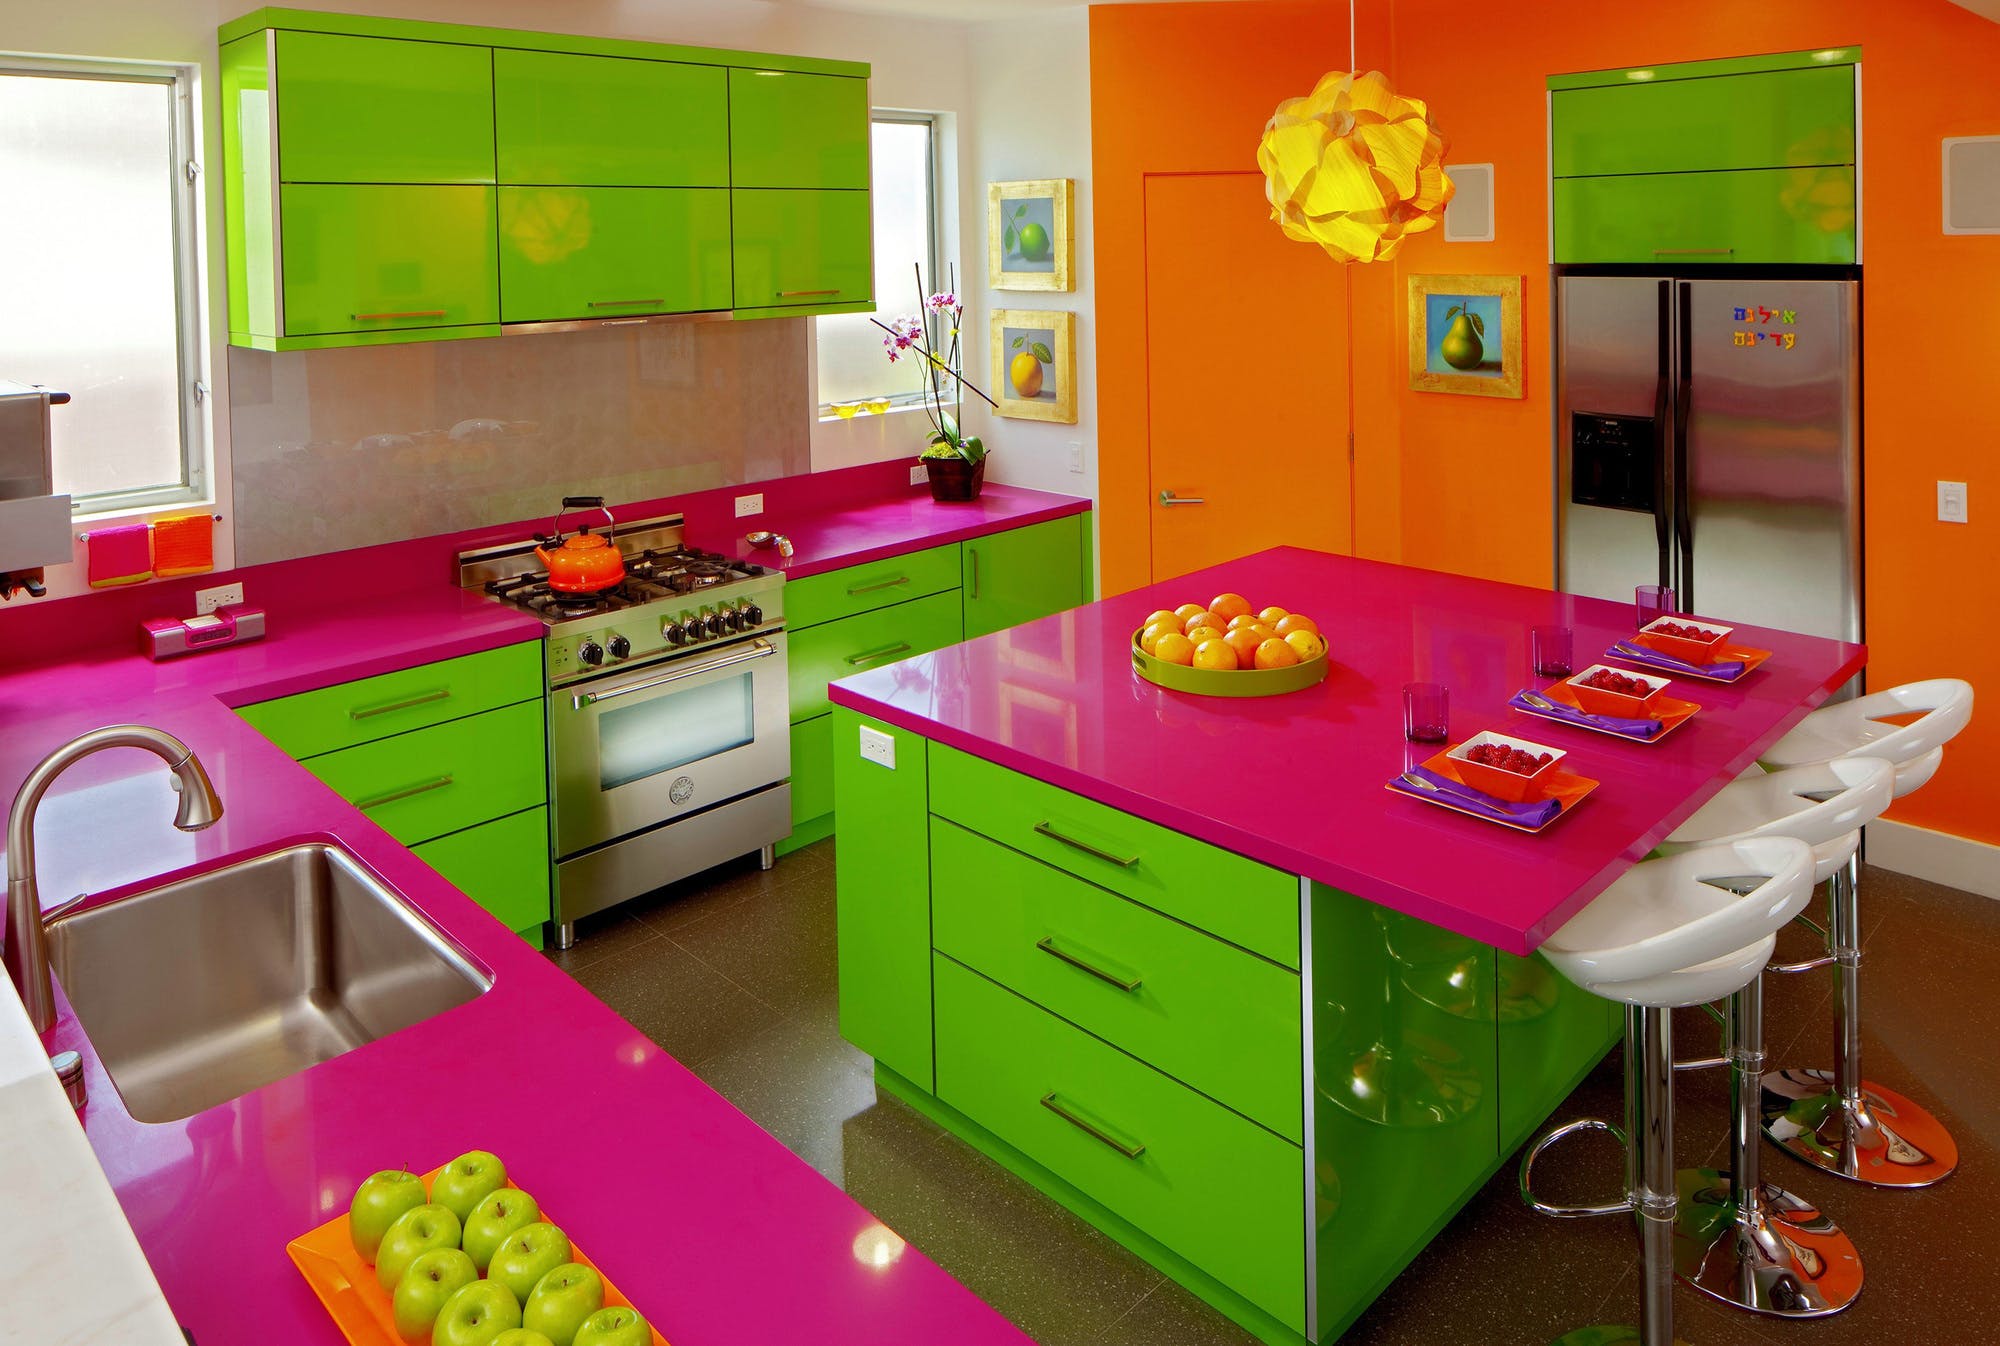 glossy-colors-in-kitchen. 80+ Unusual Kitchen Design Ideas for Small Spaces in 2021